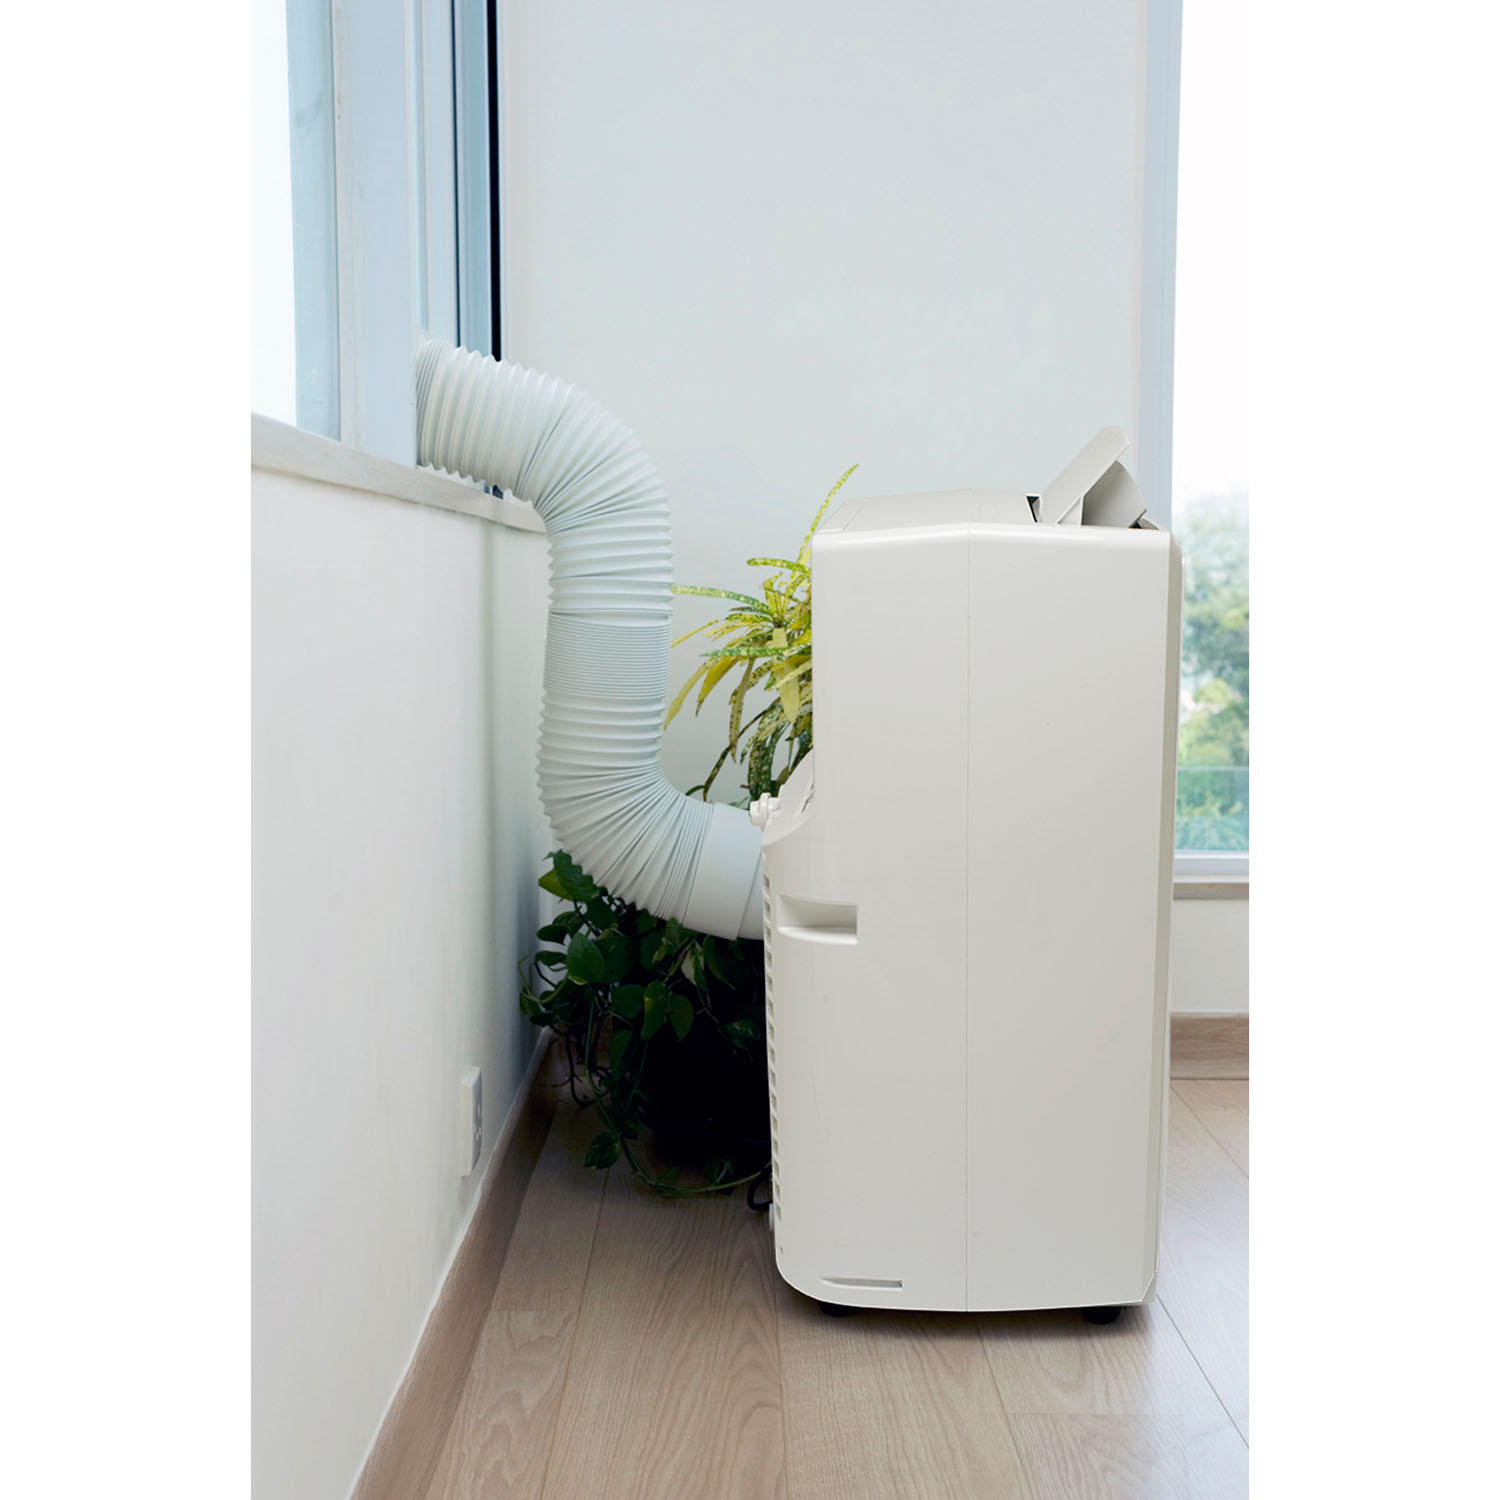 Honeywell MN Series Portable Air Conditioner with Dehumidifier and Remote Control for a Room up to 450 Sq. Ft. (White) - image 5 of 12